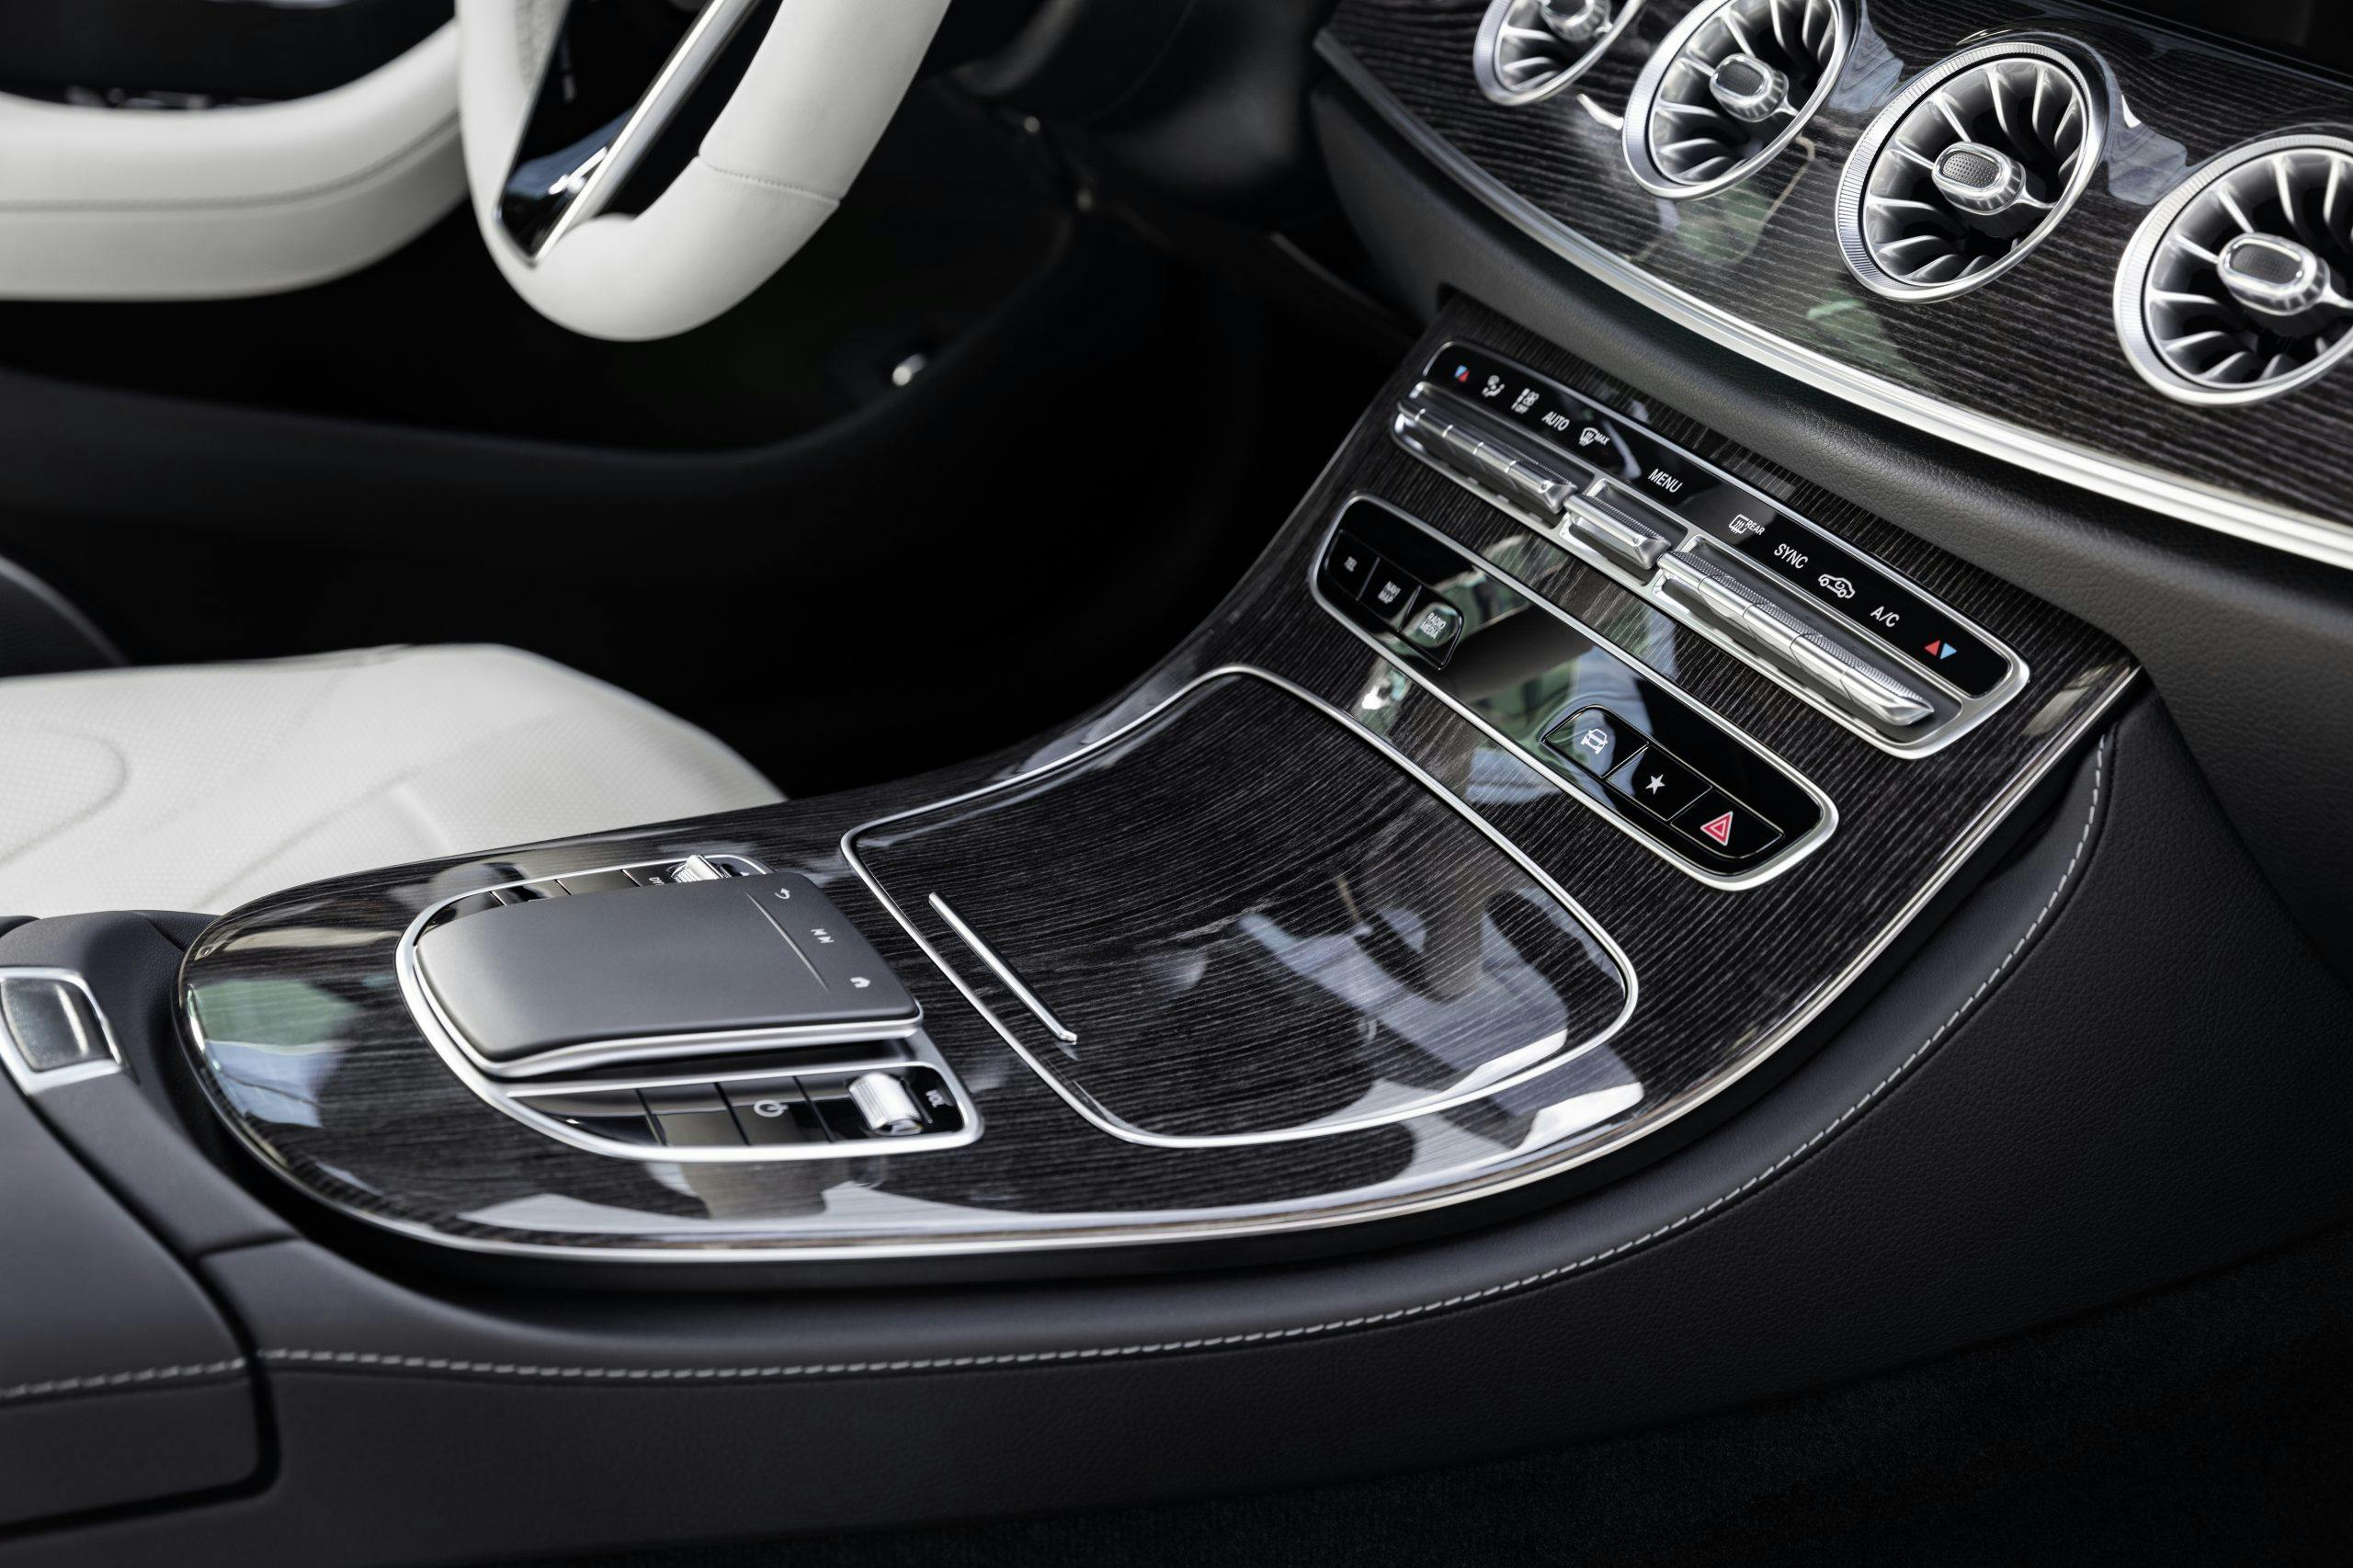 2021 Mercedes-Benz CLS 450 4Matic Coupé interior console touchpad